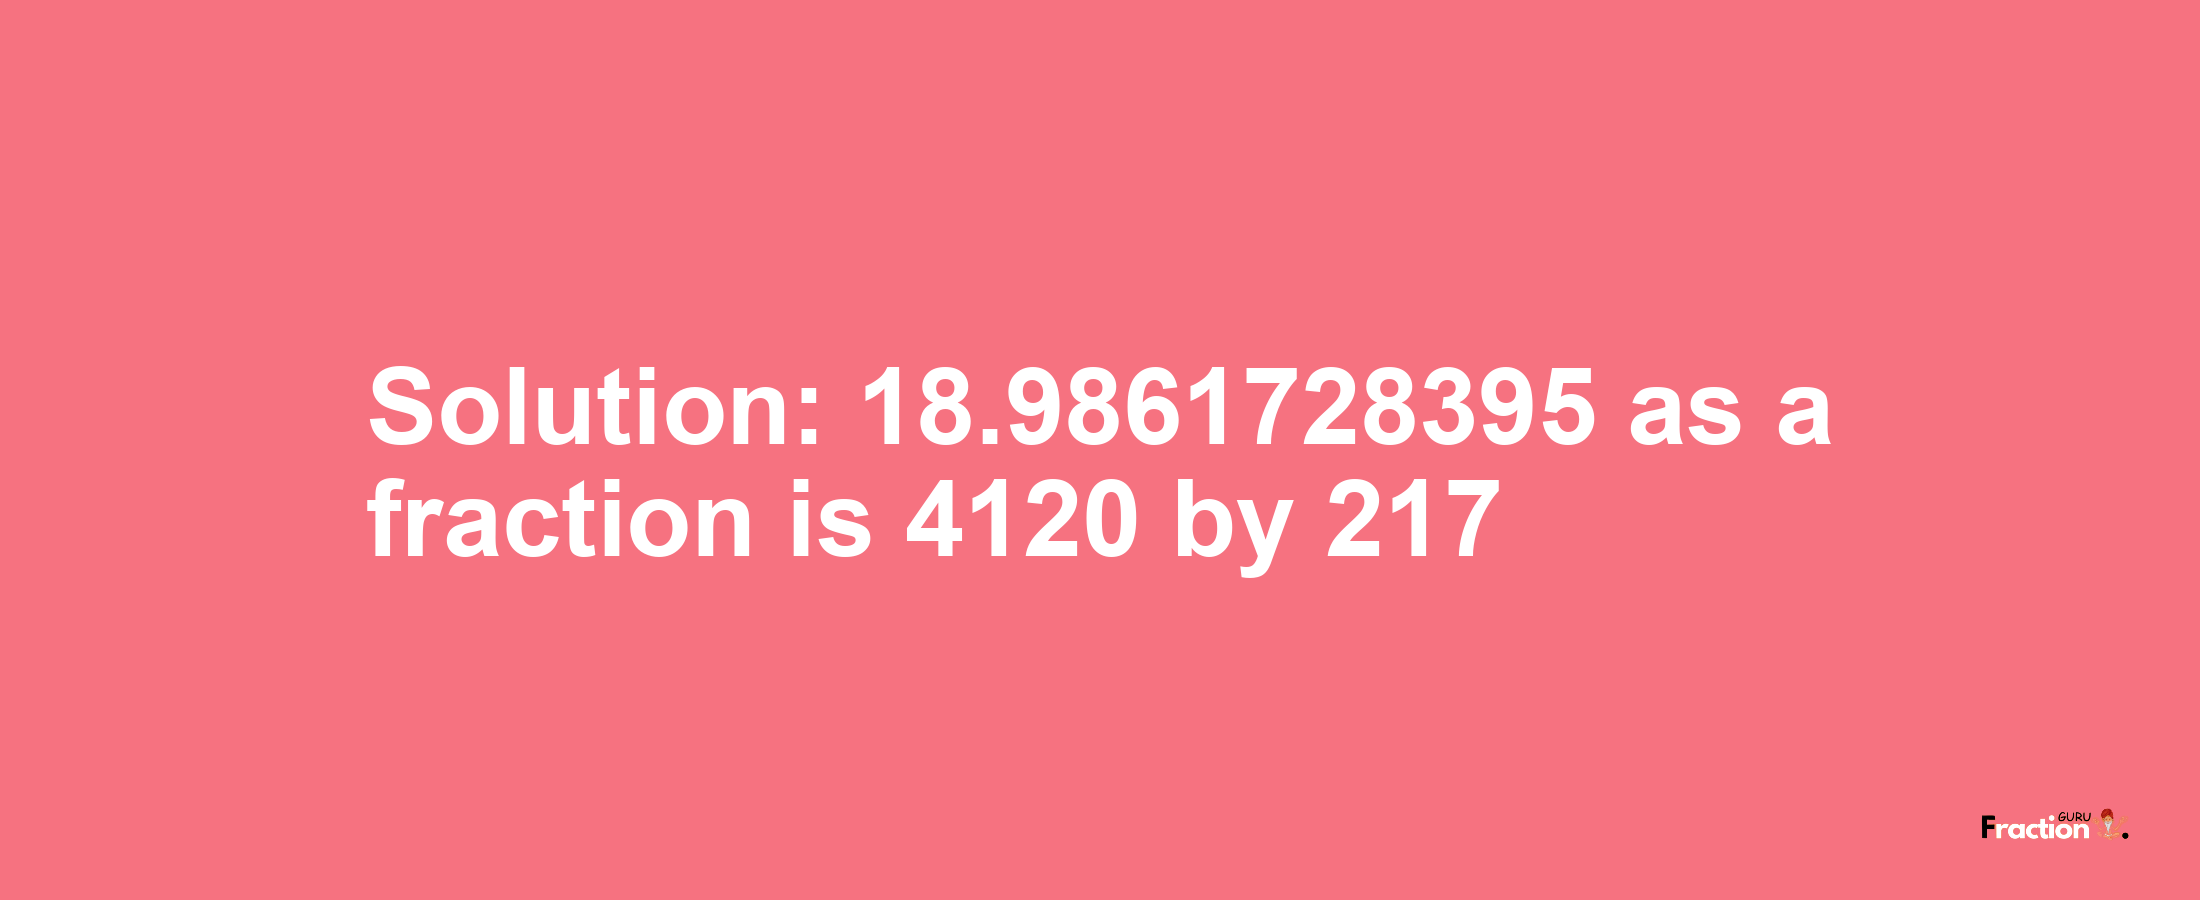 Solution:18.9861728395 as a fraction is 4120/217